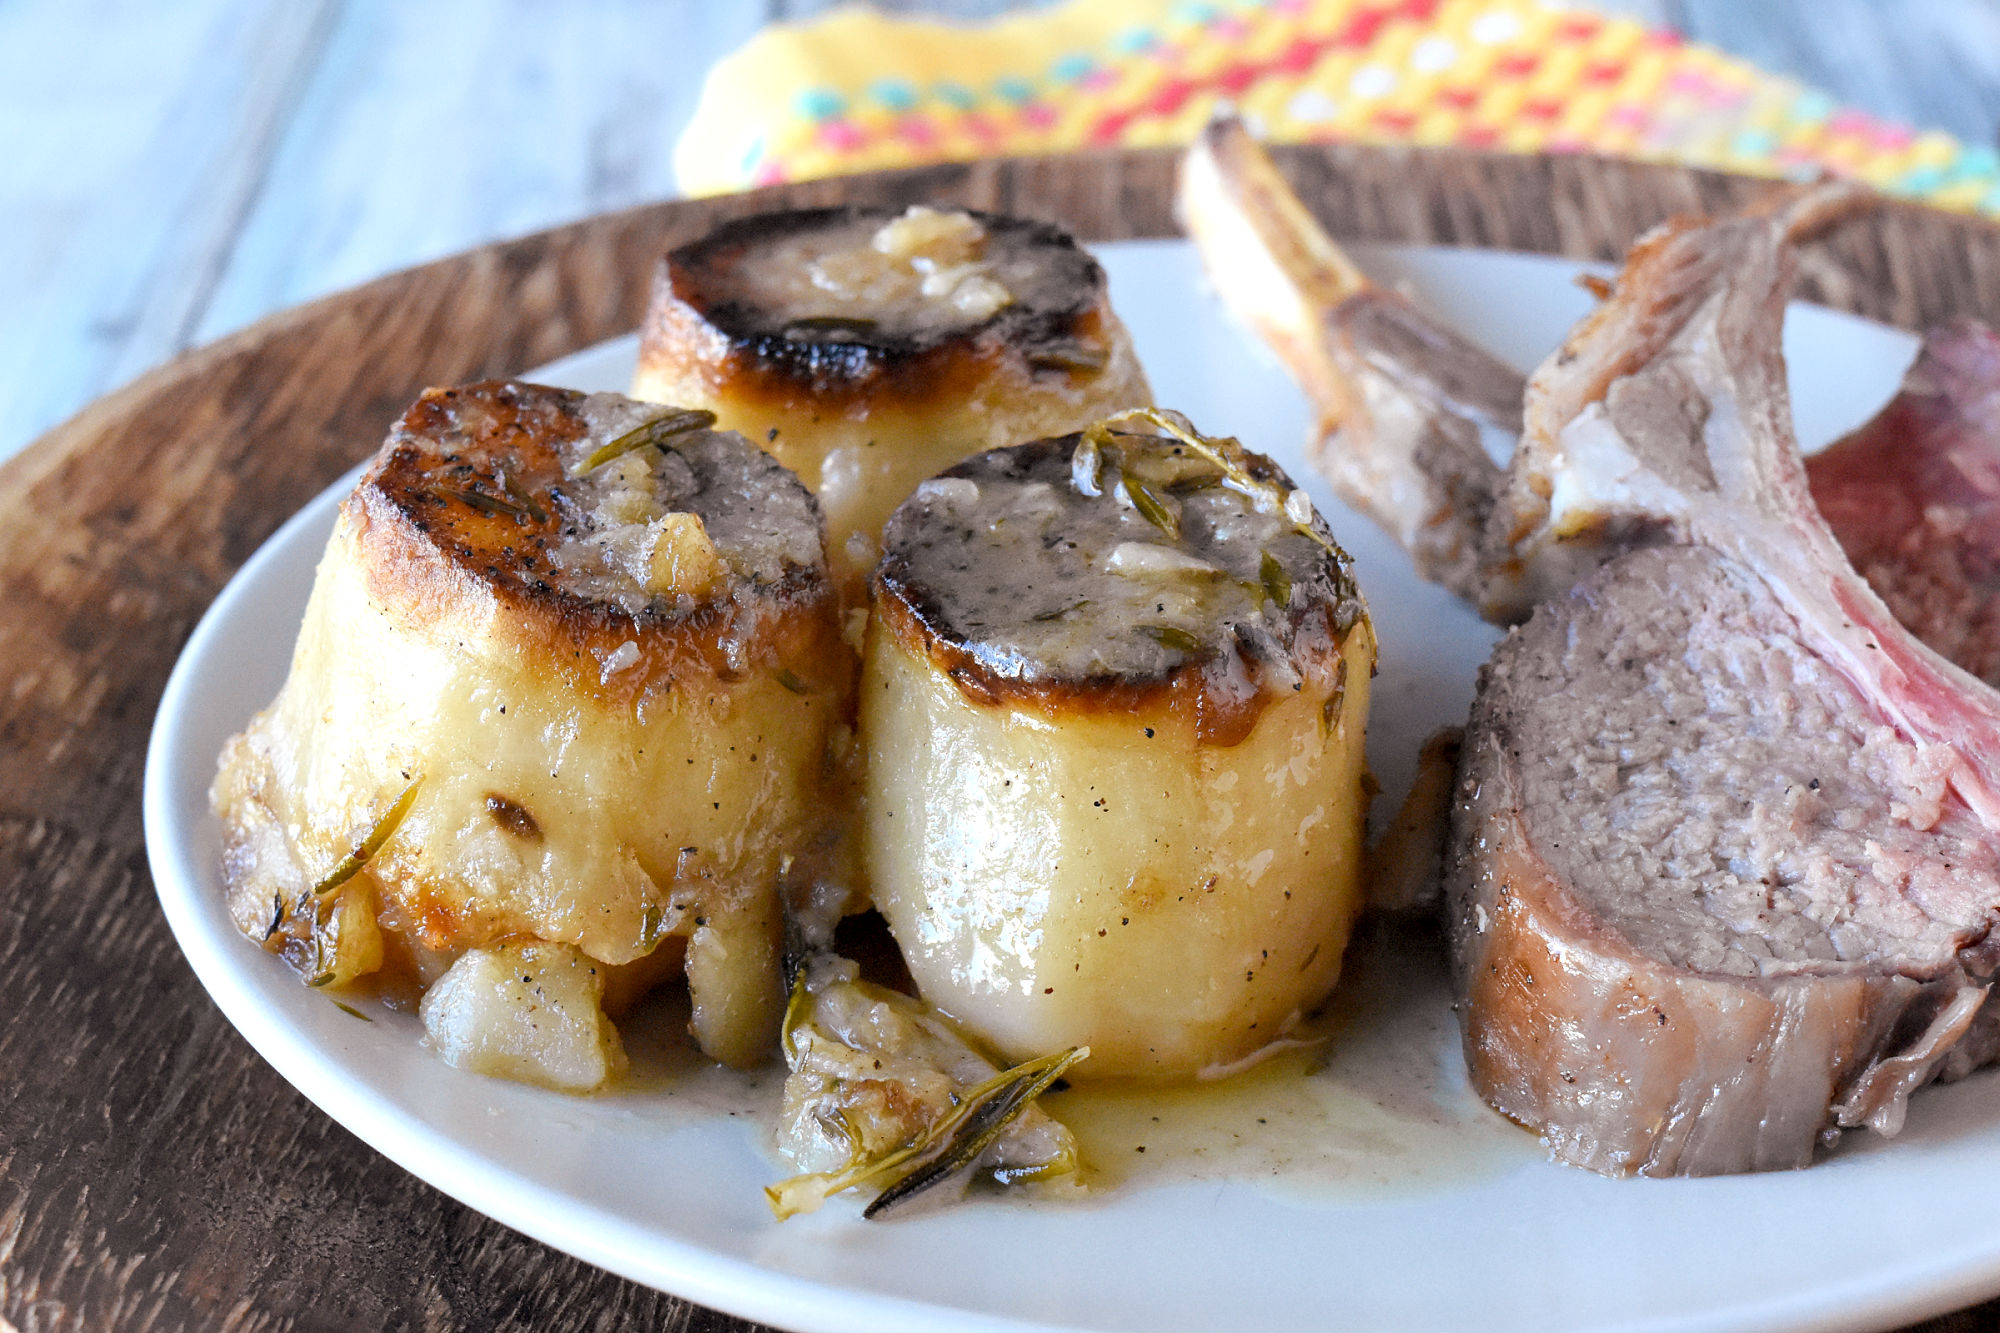 Unleash your inner chef with this simple yet impressive recipe for Fondant Potatoes. It’s the perfect side dish for your date night dinner. #OurFamilyTable #FoodieFavorites #GourmetSides #FoodEnthusiast #InstaGourmet #PotatoPerfection
